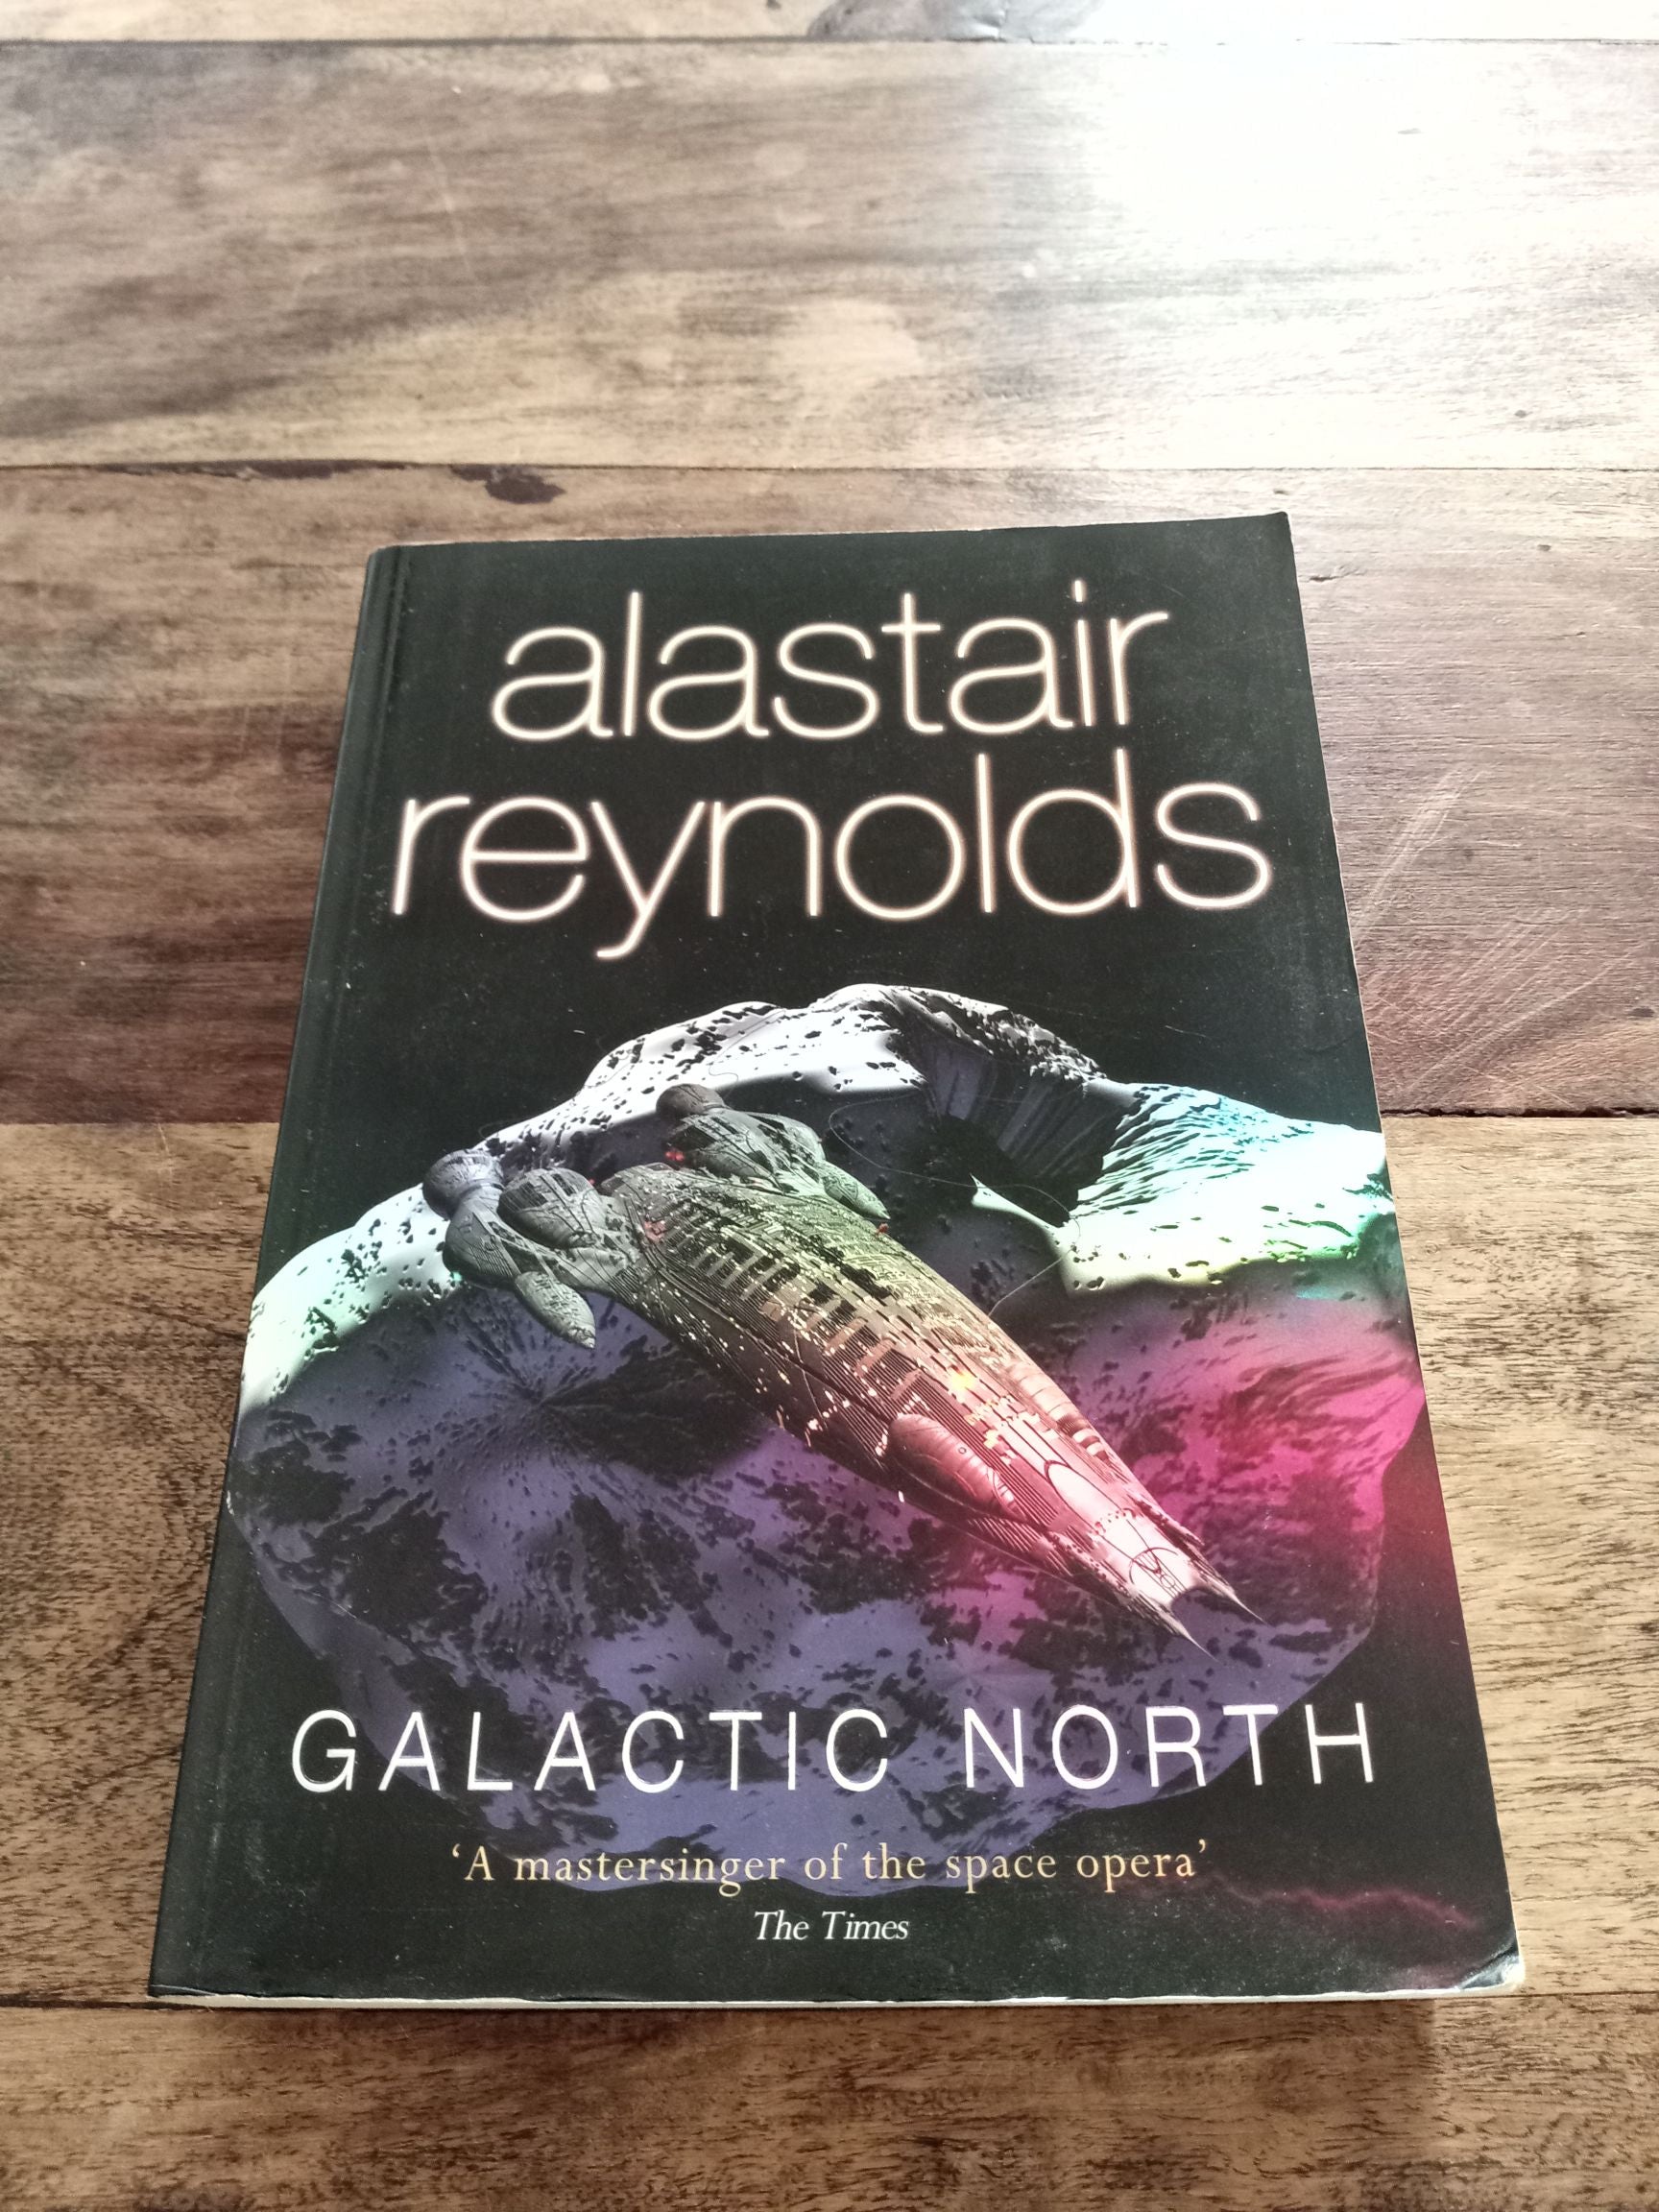 Revelation Space (Revelation Space, #1) by Alastair Reynolds